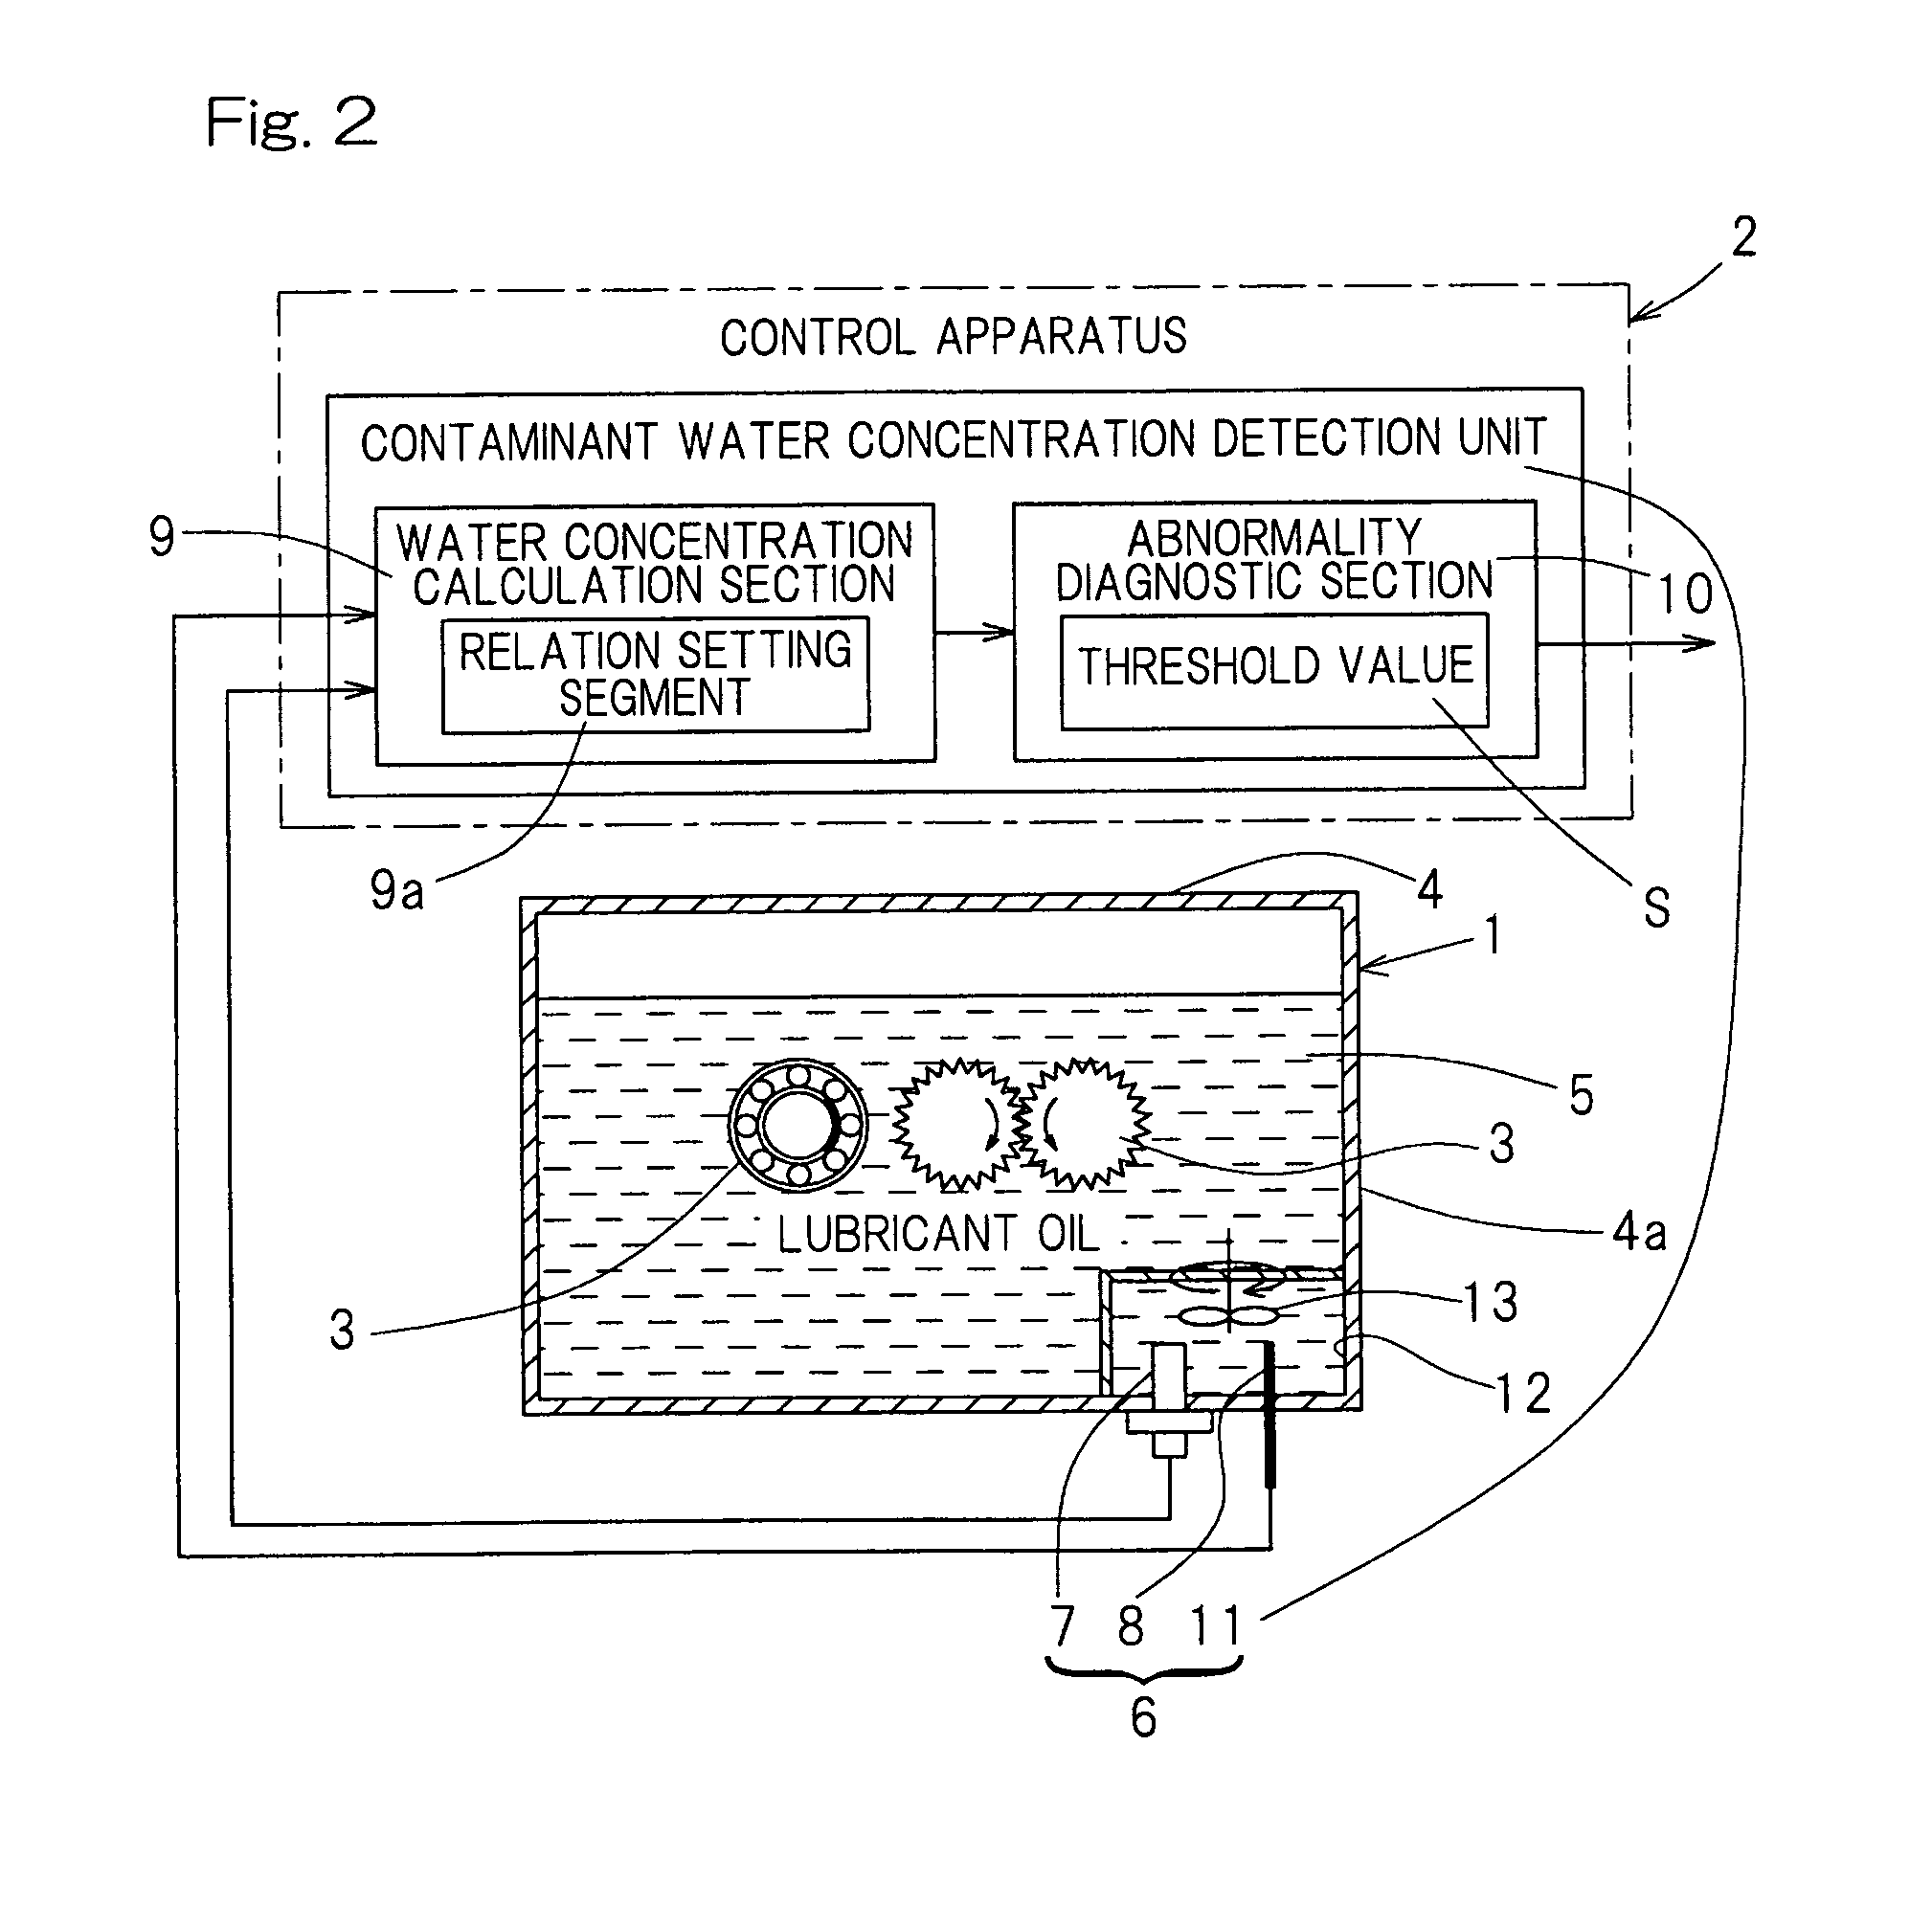 Status monitoring system and status monitoring method for rolling device